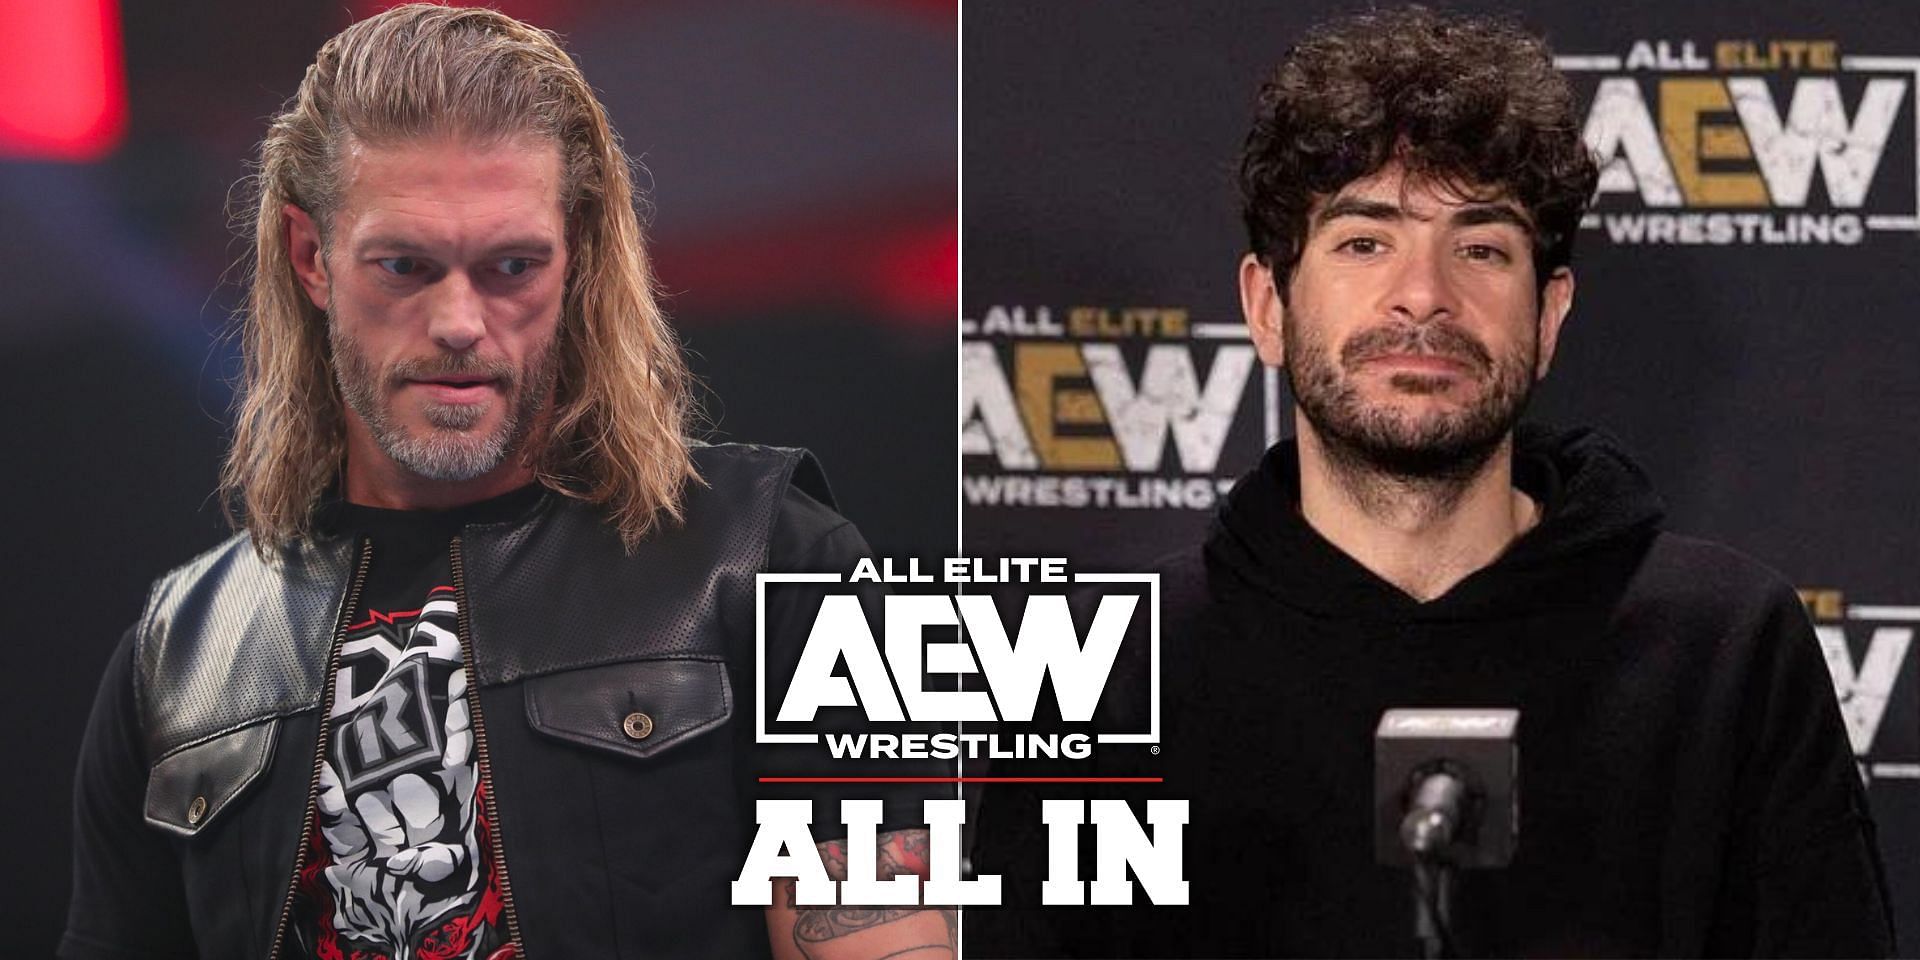 Will Edge show up at AEW All in?